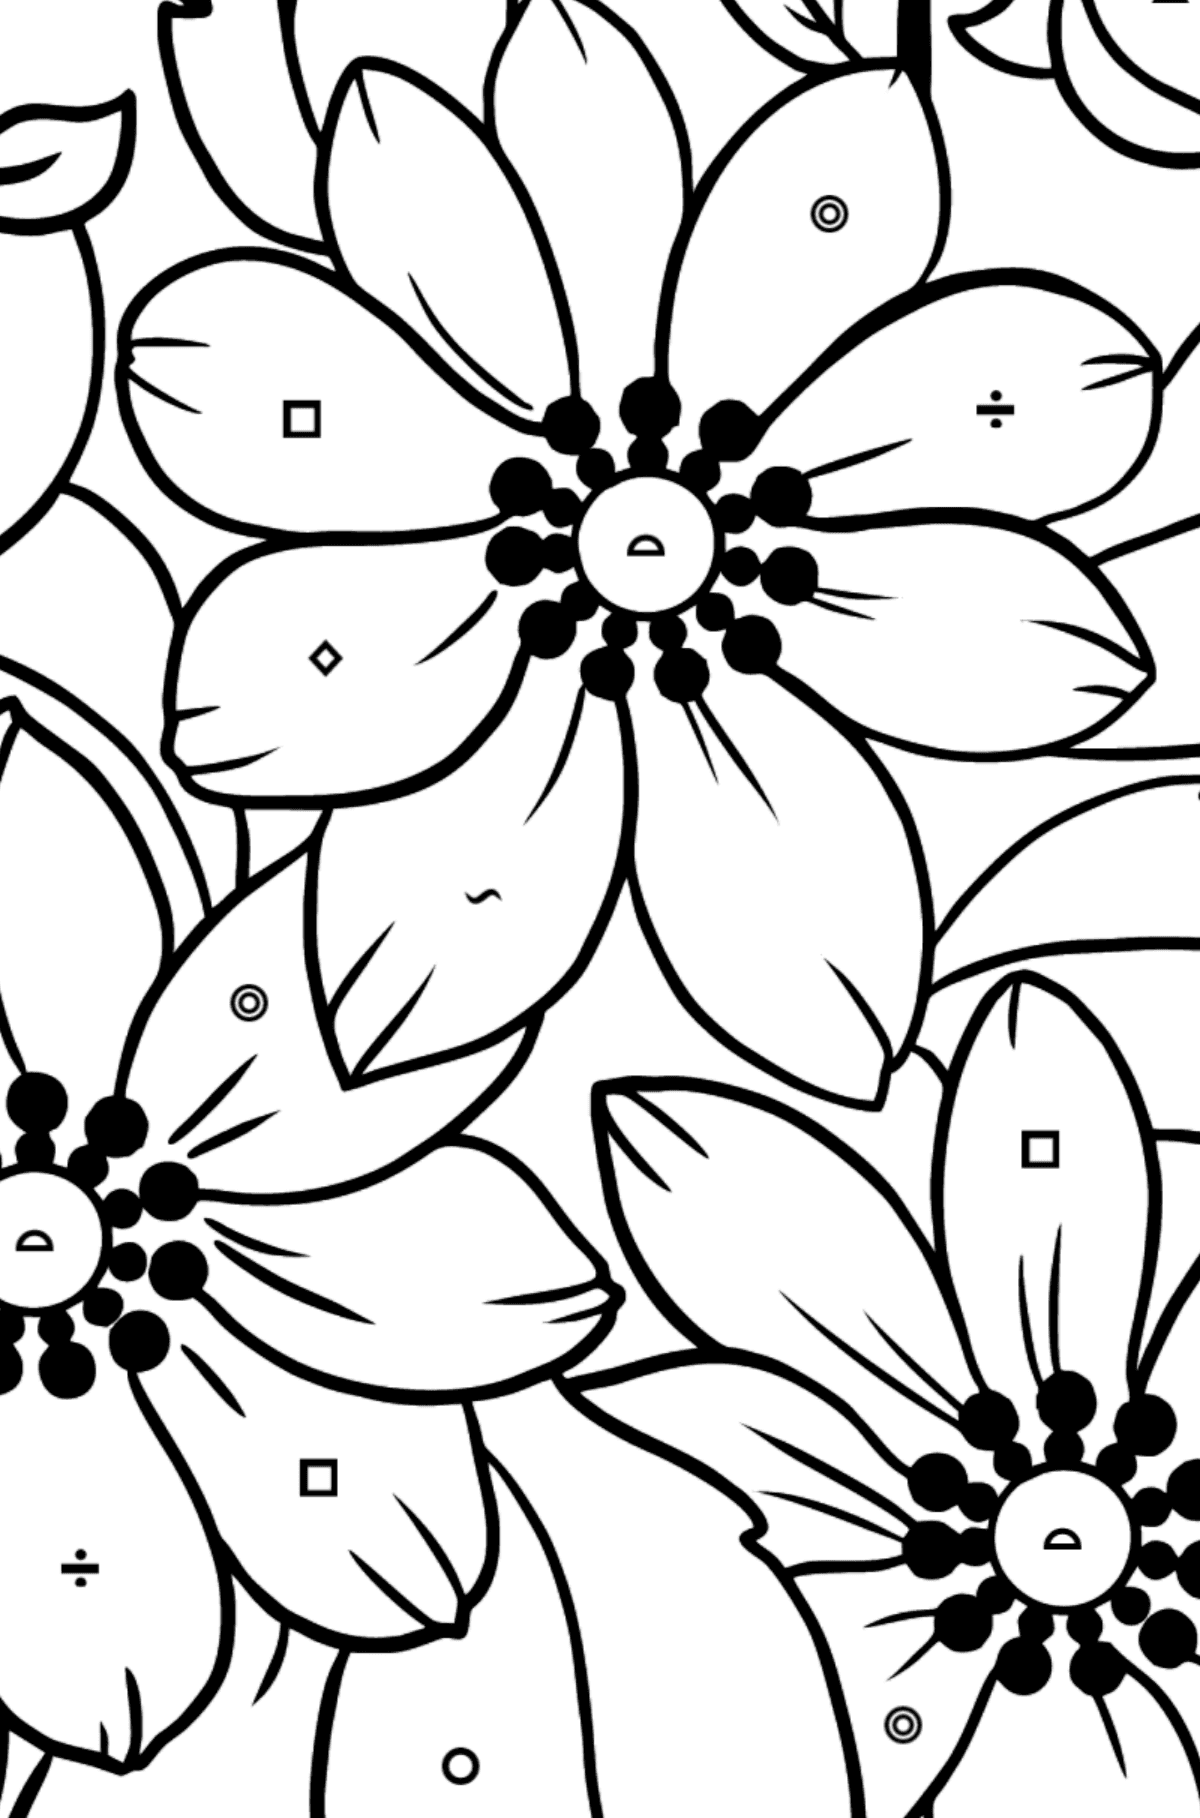 Flower Coloring Page - An Orange and Yellow Anemone - Coloring by Symbols and Geometric Shapes for Kids